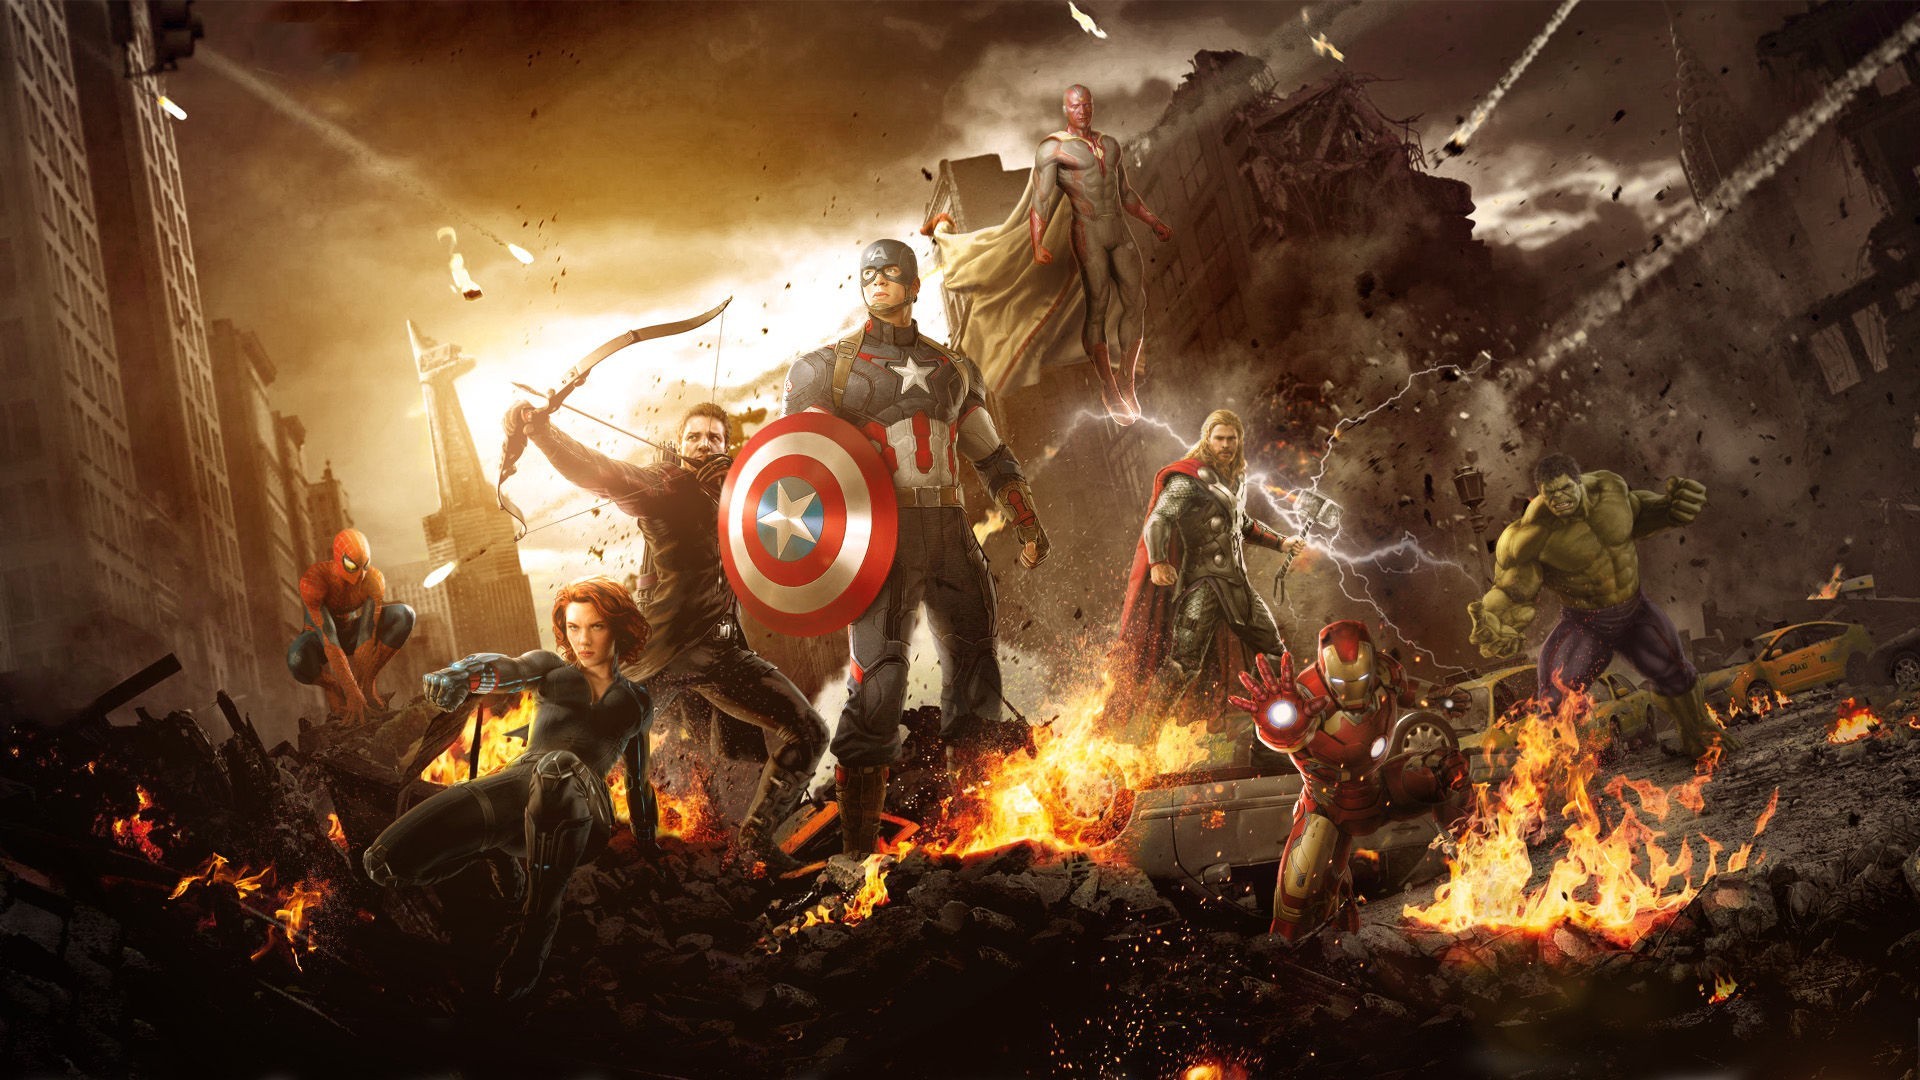 Wallpaper HD Avengers 3 With Resolution 1920X1080